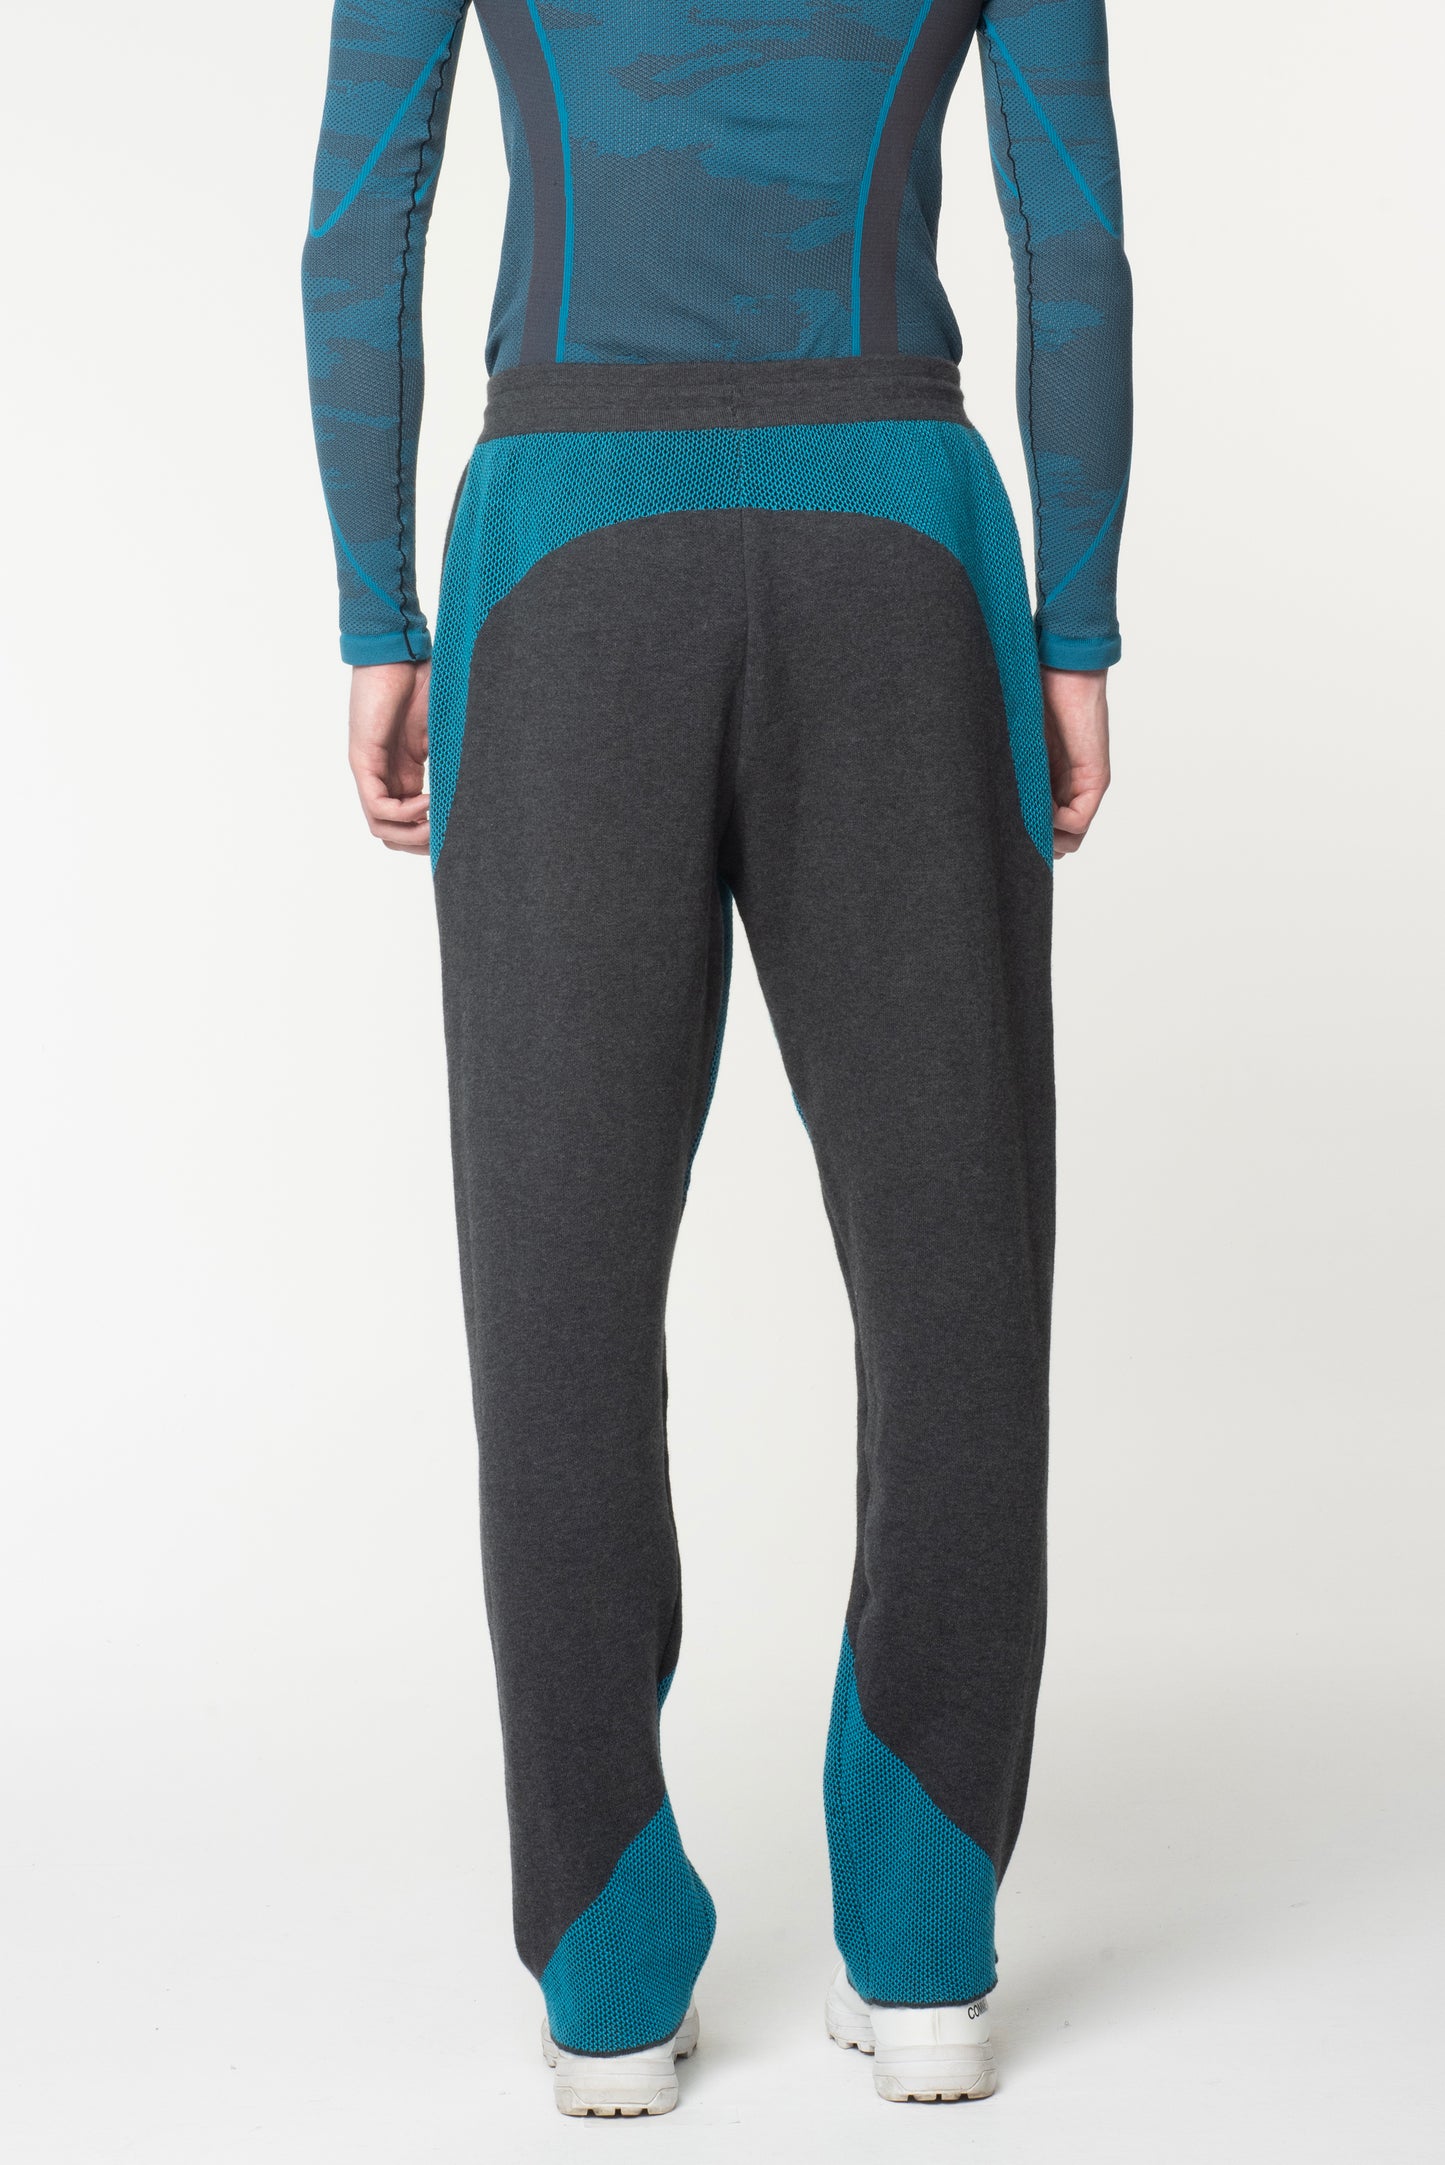 CYPHER MESH KNIT TROUSERS - ANTHRACITE